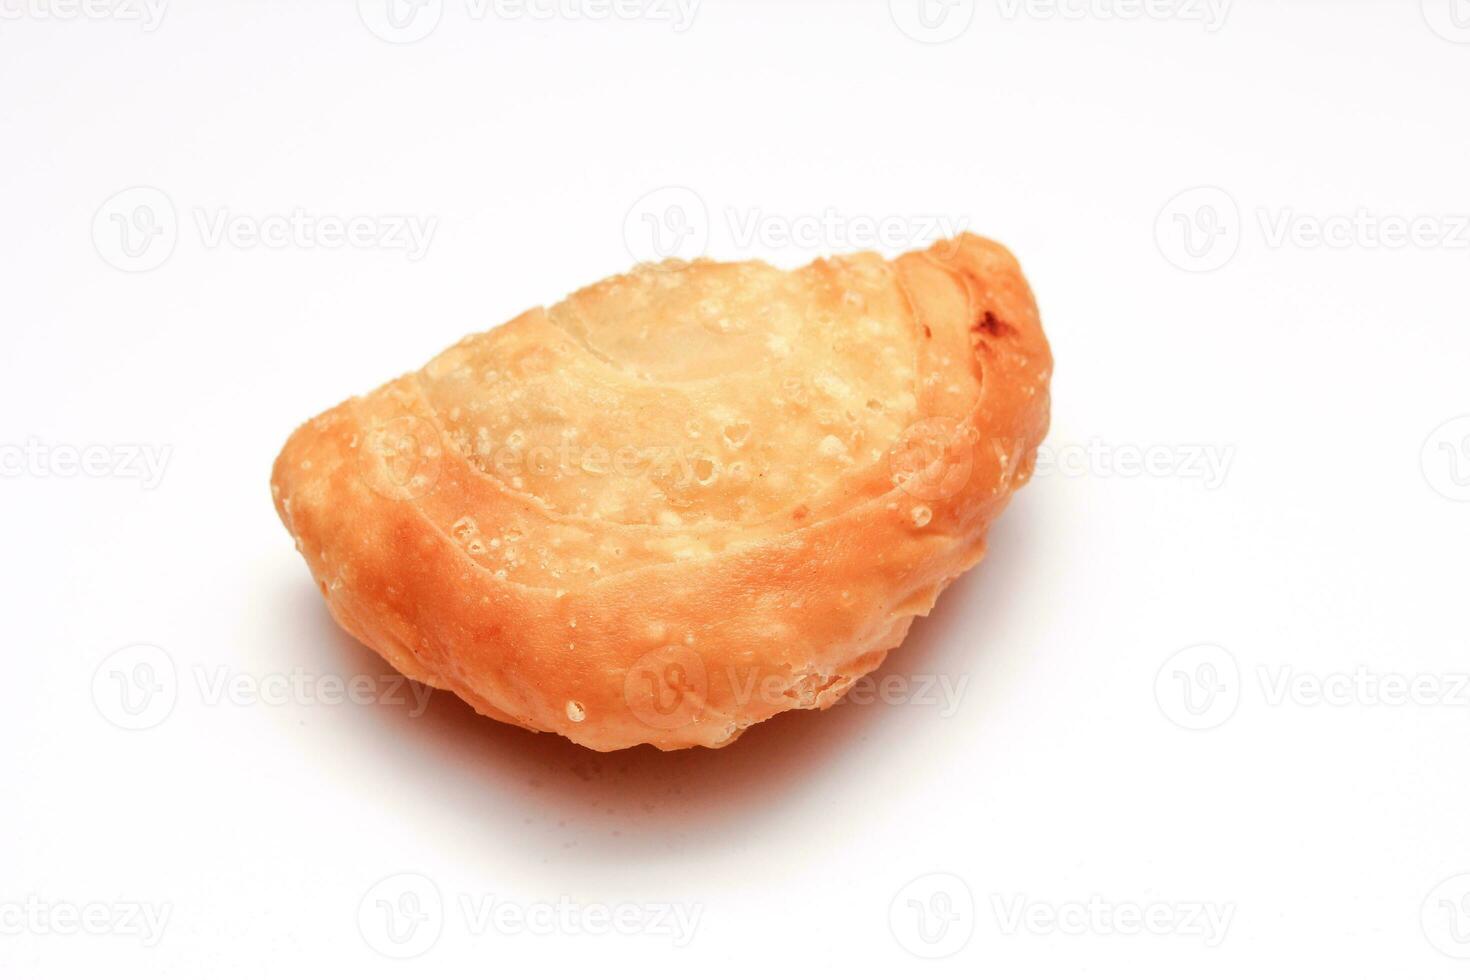 Fried flour snack or curry puff filled with chicken, a popular snack in Thailand. placed on a white background photo